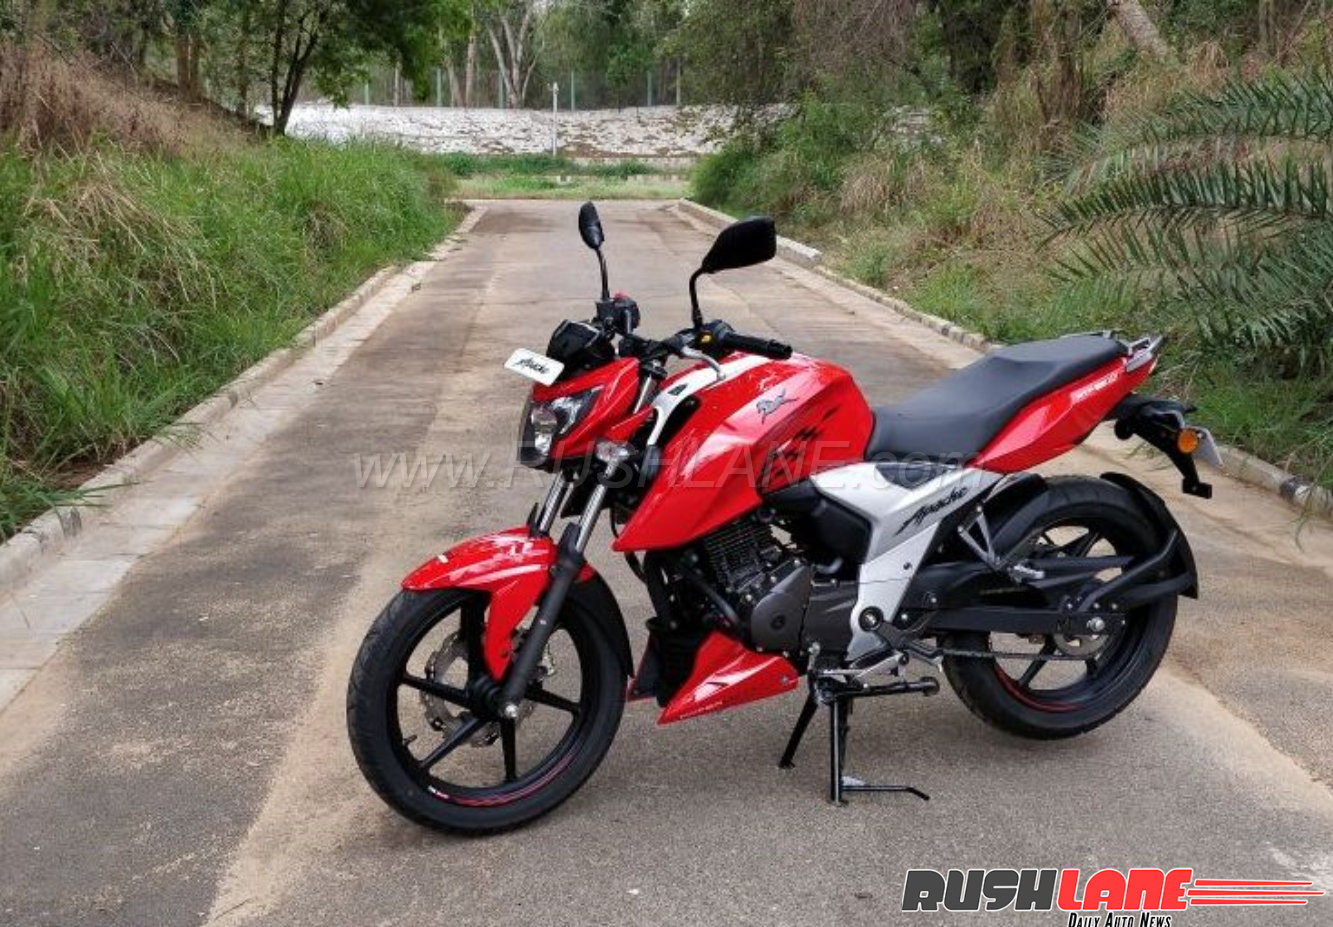 New Tvs Apache 160 Review Does It Have Enough To Be The Best